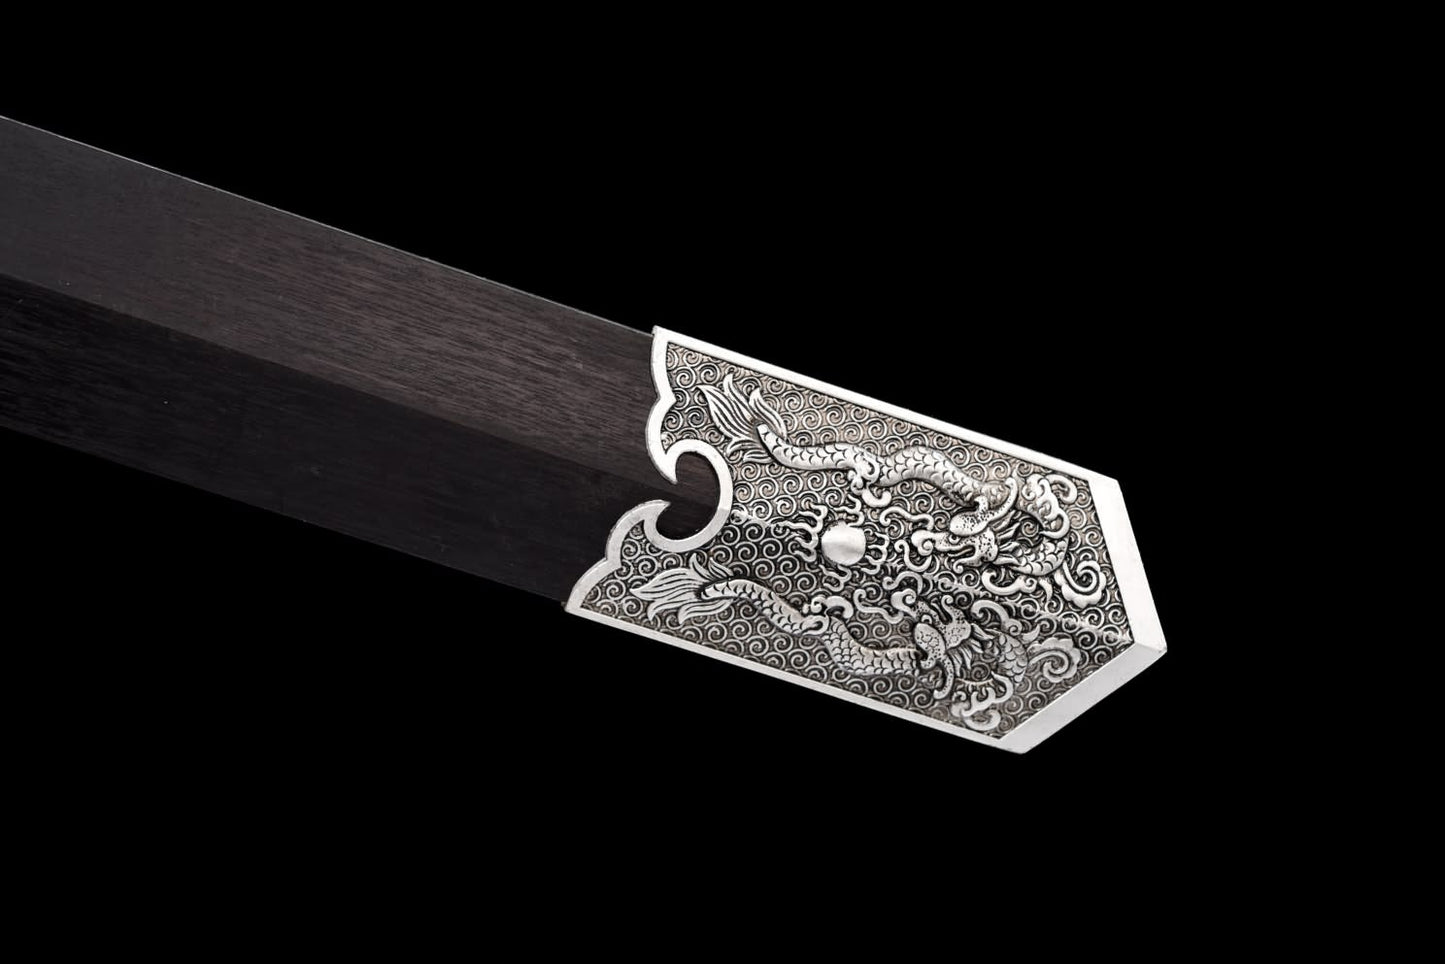 Chinese Swords Han jian Sword Real,Hand Forged Damascus Blades,Black Wood Scabbard,Alloy Handle